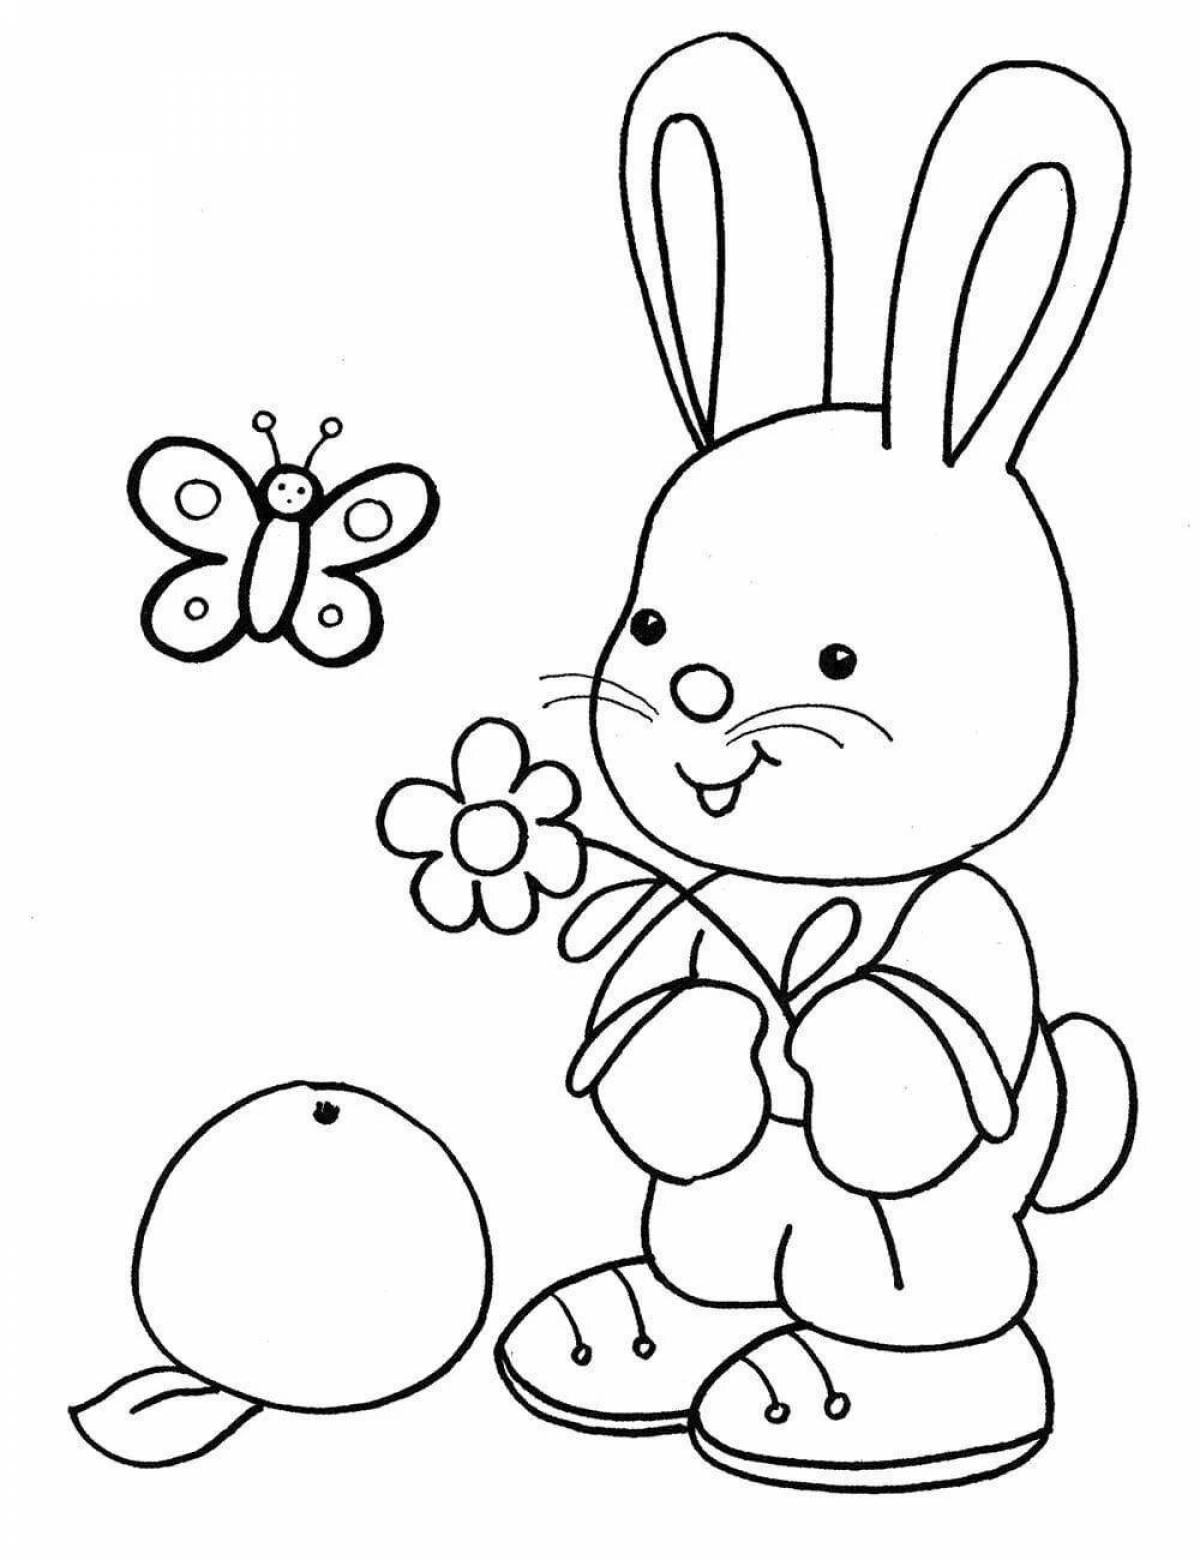 Coloring book for girls 4 years old